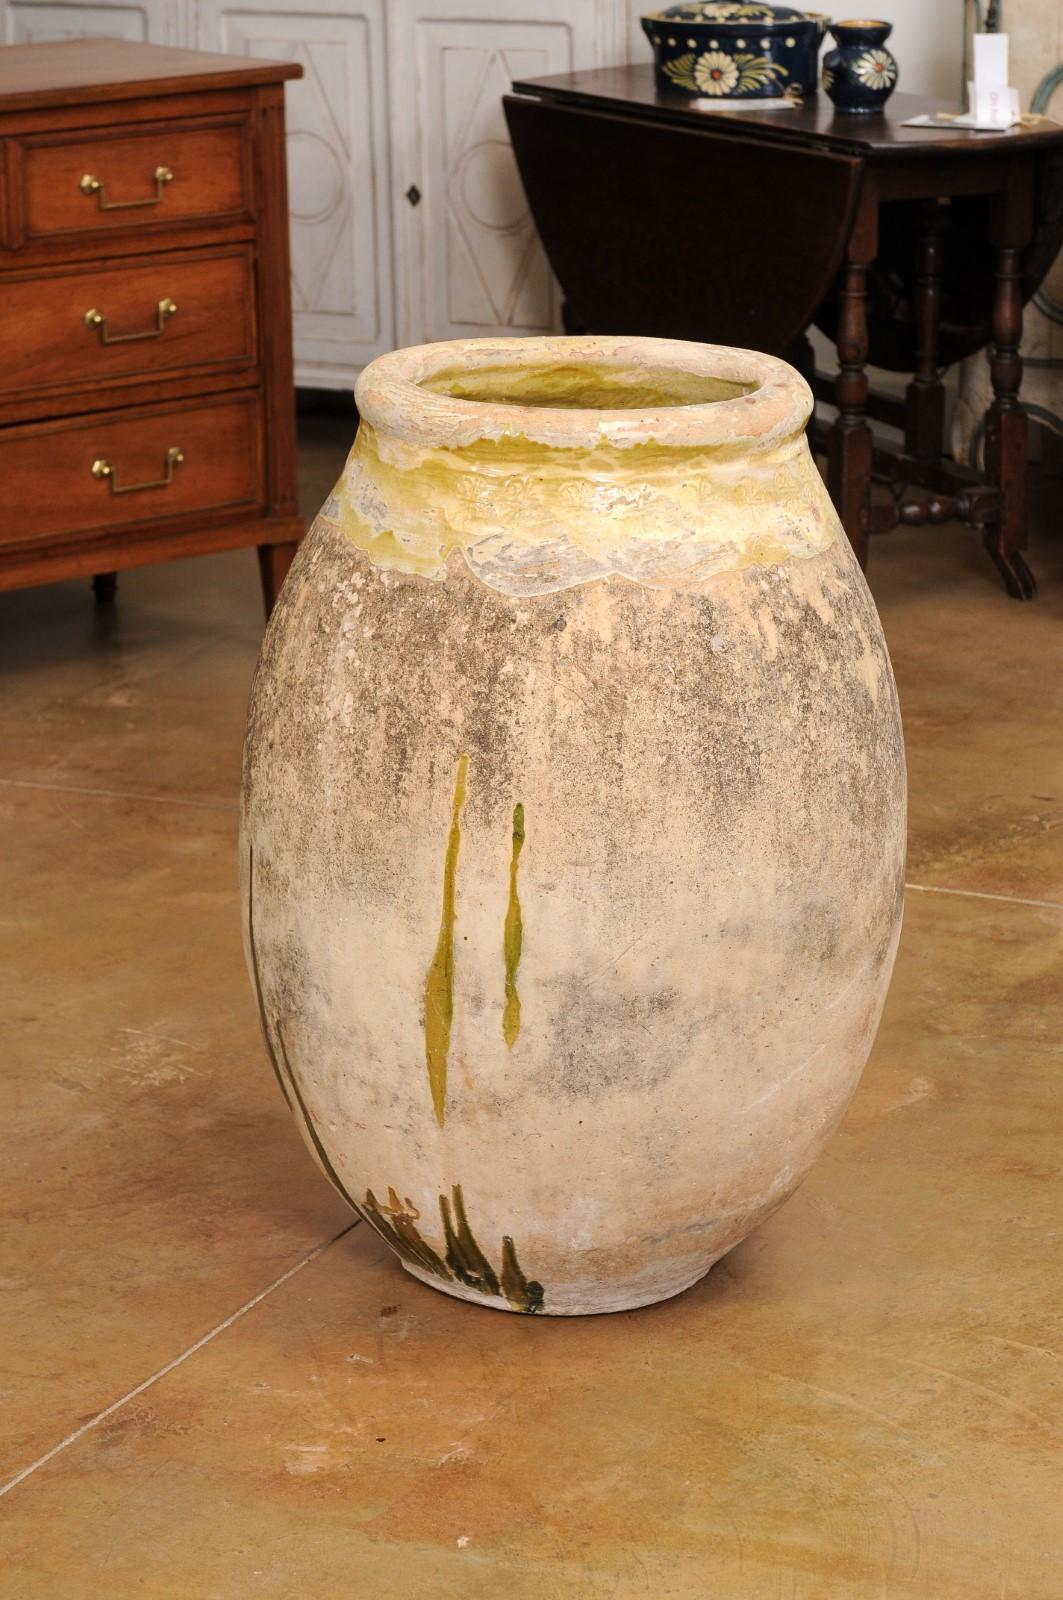 French 19th Century Terracotta Biot Jar with Yellow Glaze and Rustic Character For Sale 7